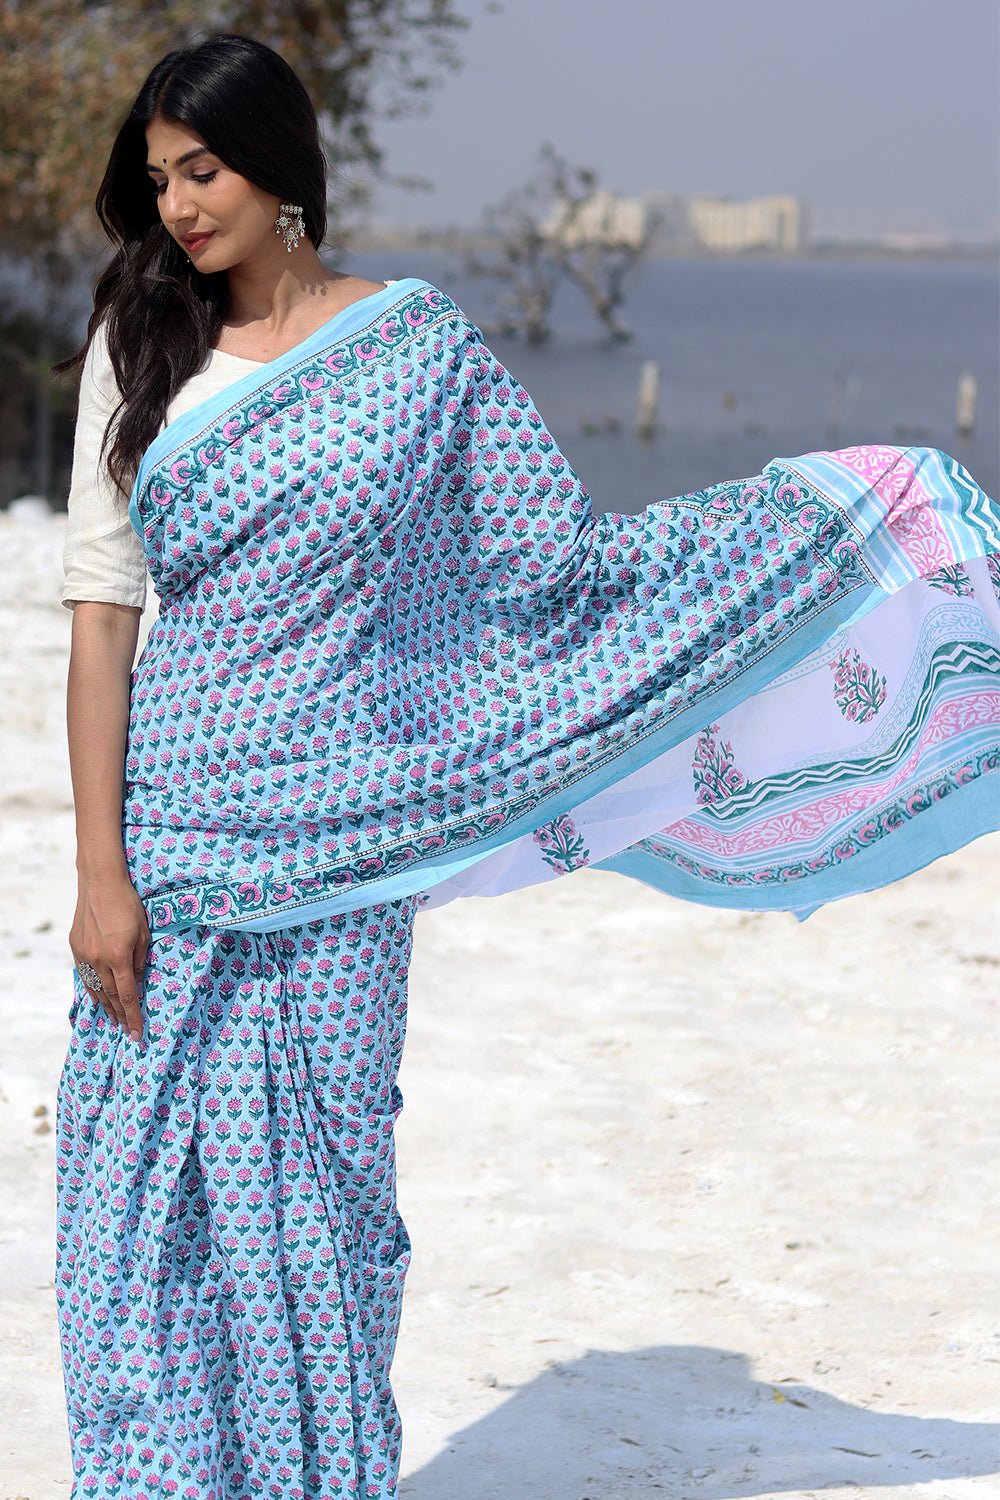 Presenting 'Stardust' from Popsicle edit. Handloom woven, lightweight,  cotton sarees in pop colorblock aesthetic, embellished with thin